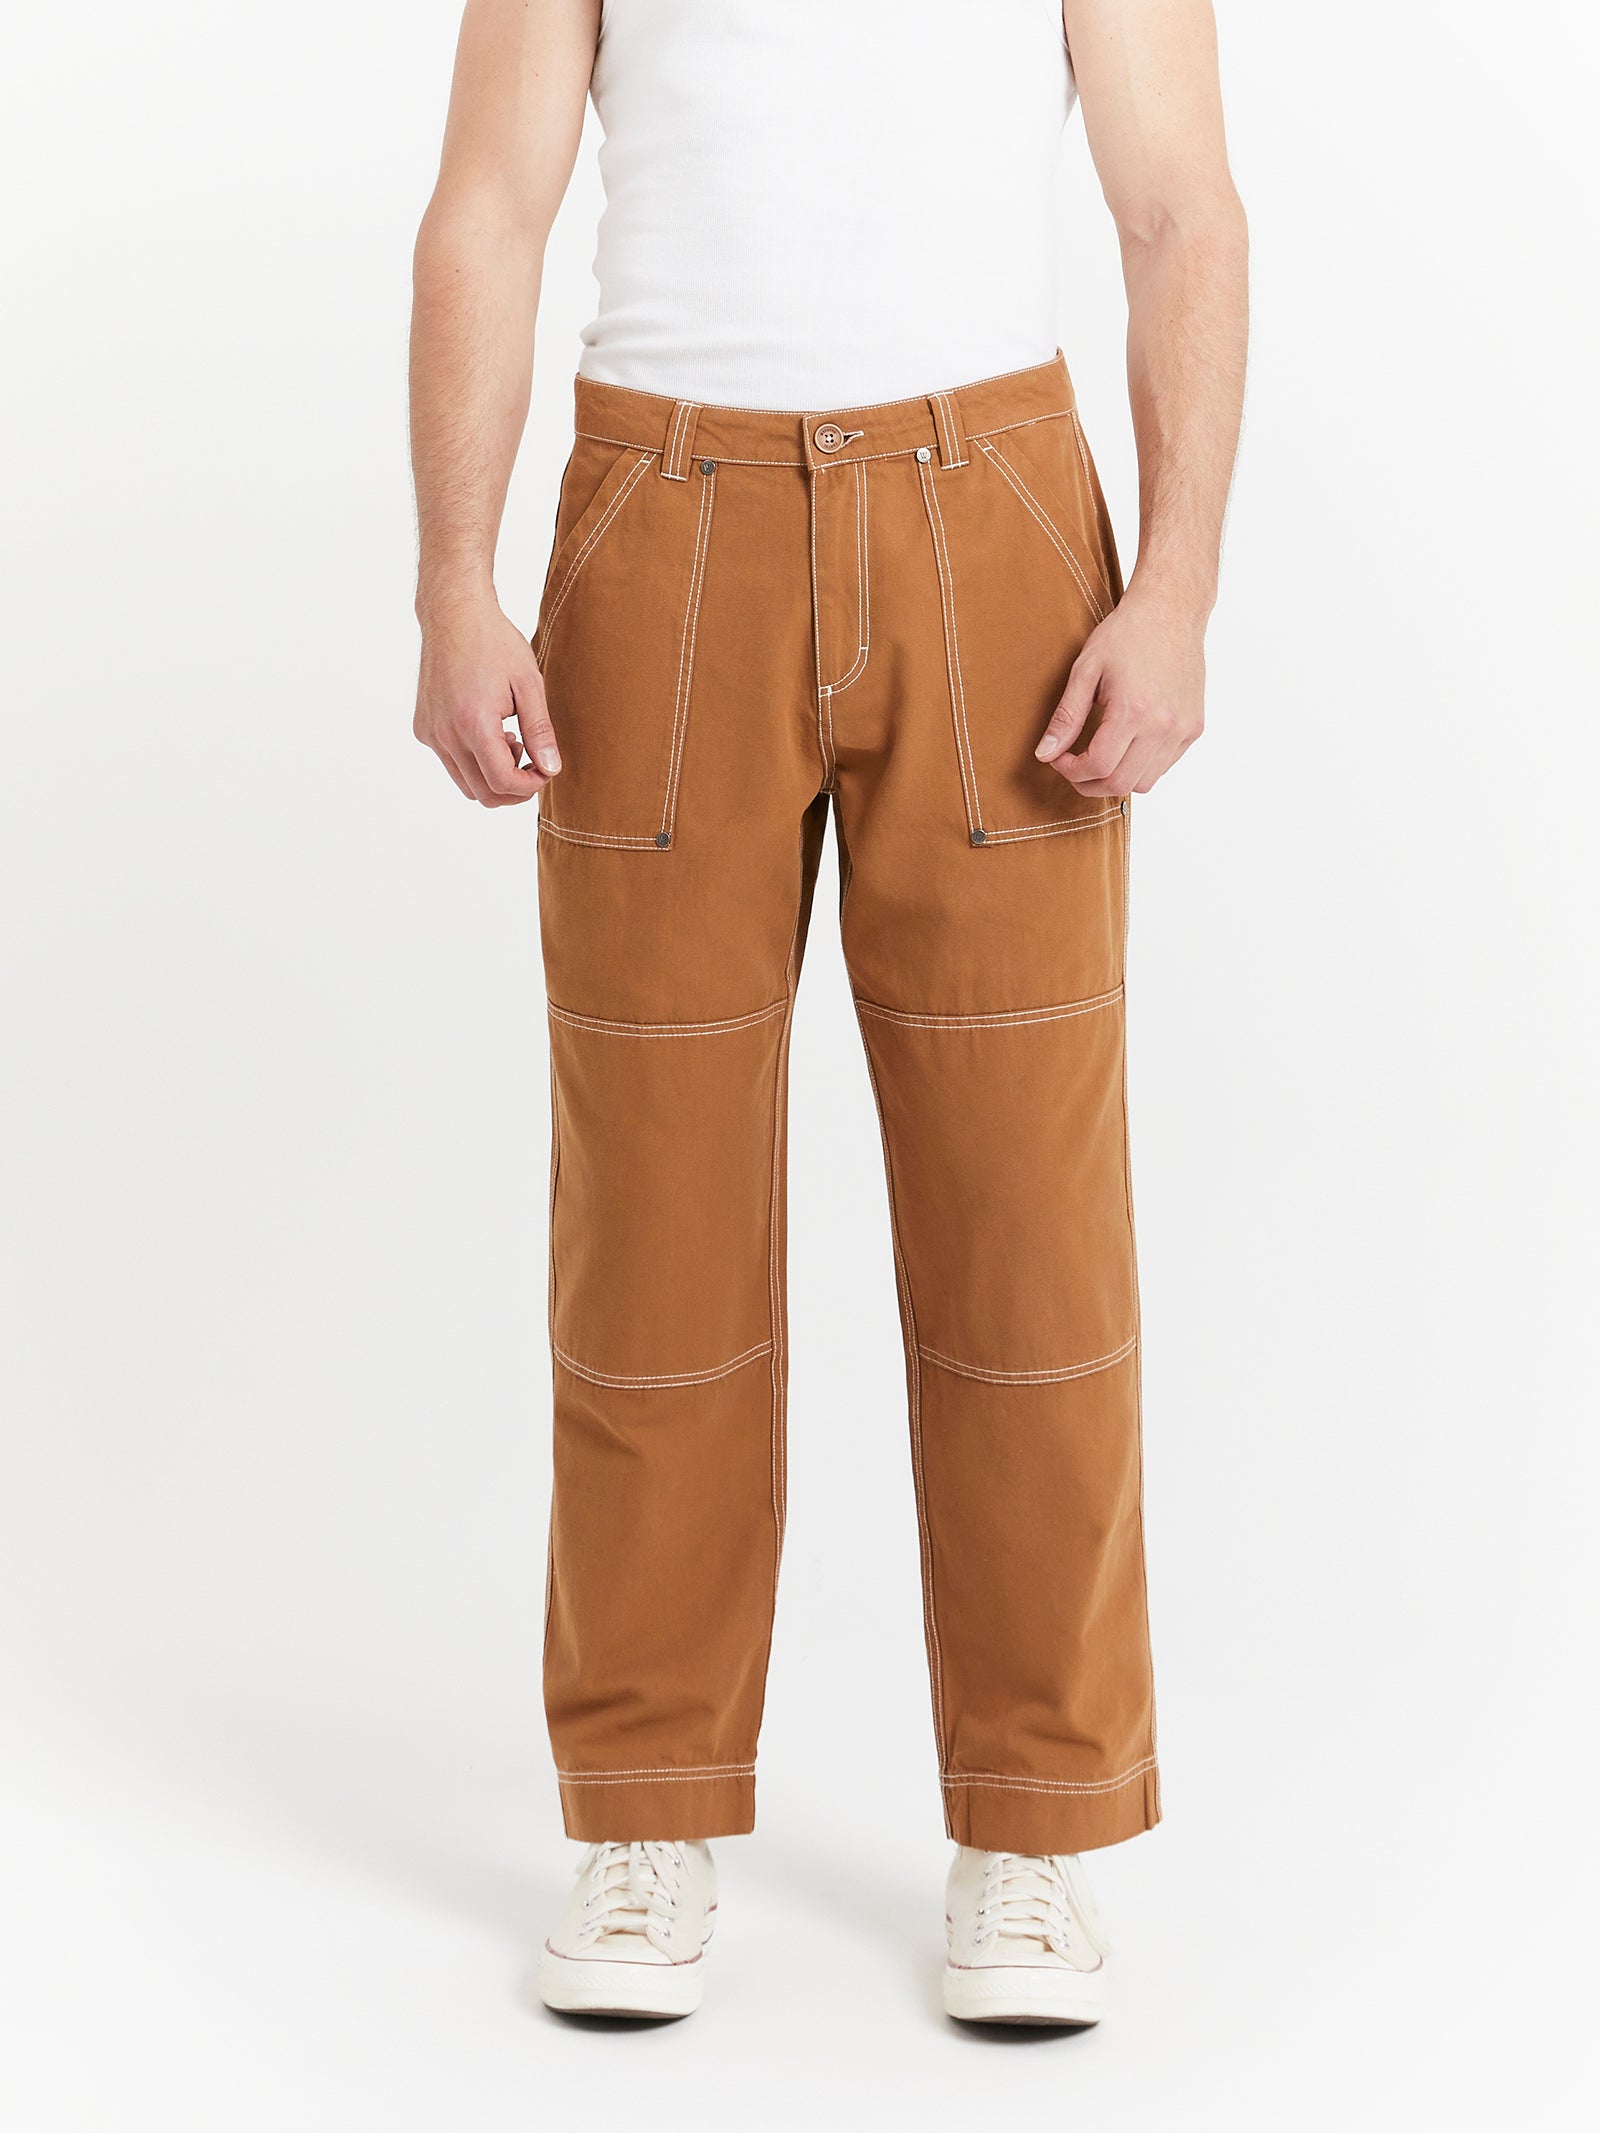 Desolate Utility Pants in Sepia